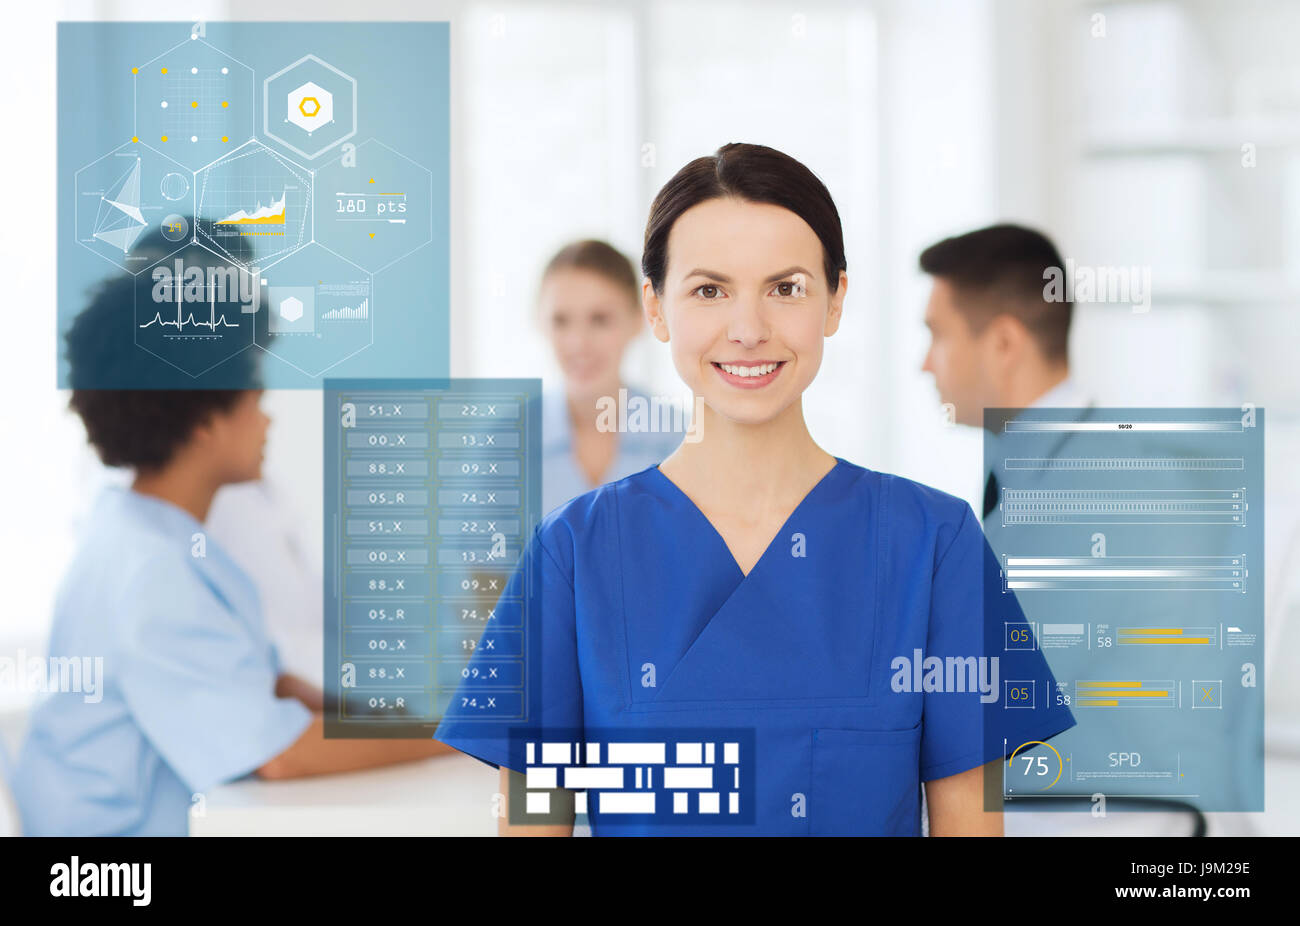 happy smiling doctor or nurse at hospital Stock Photo